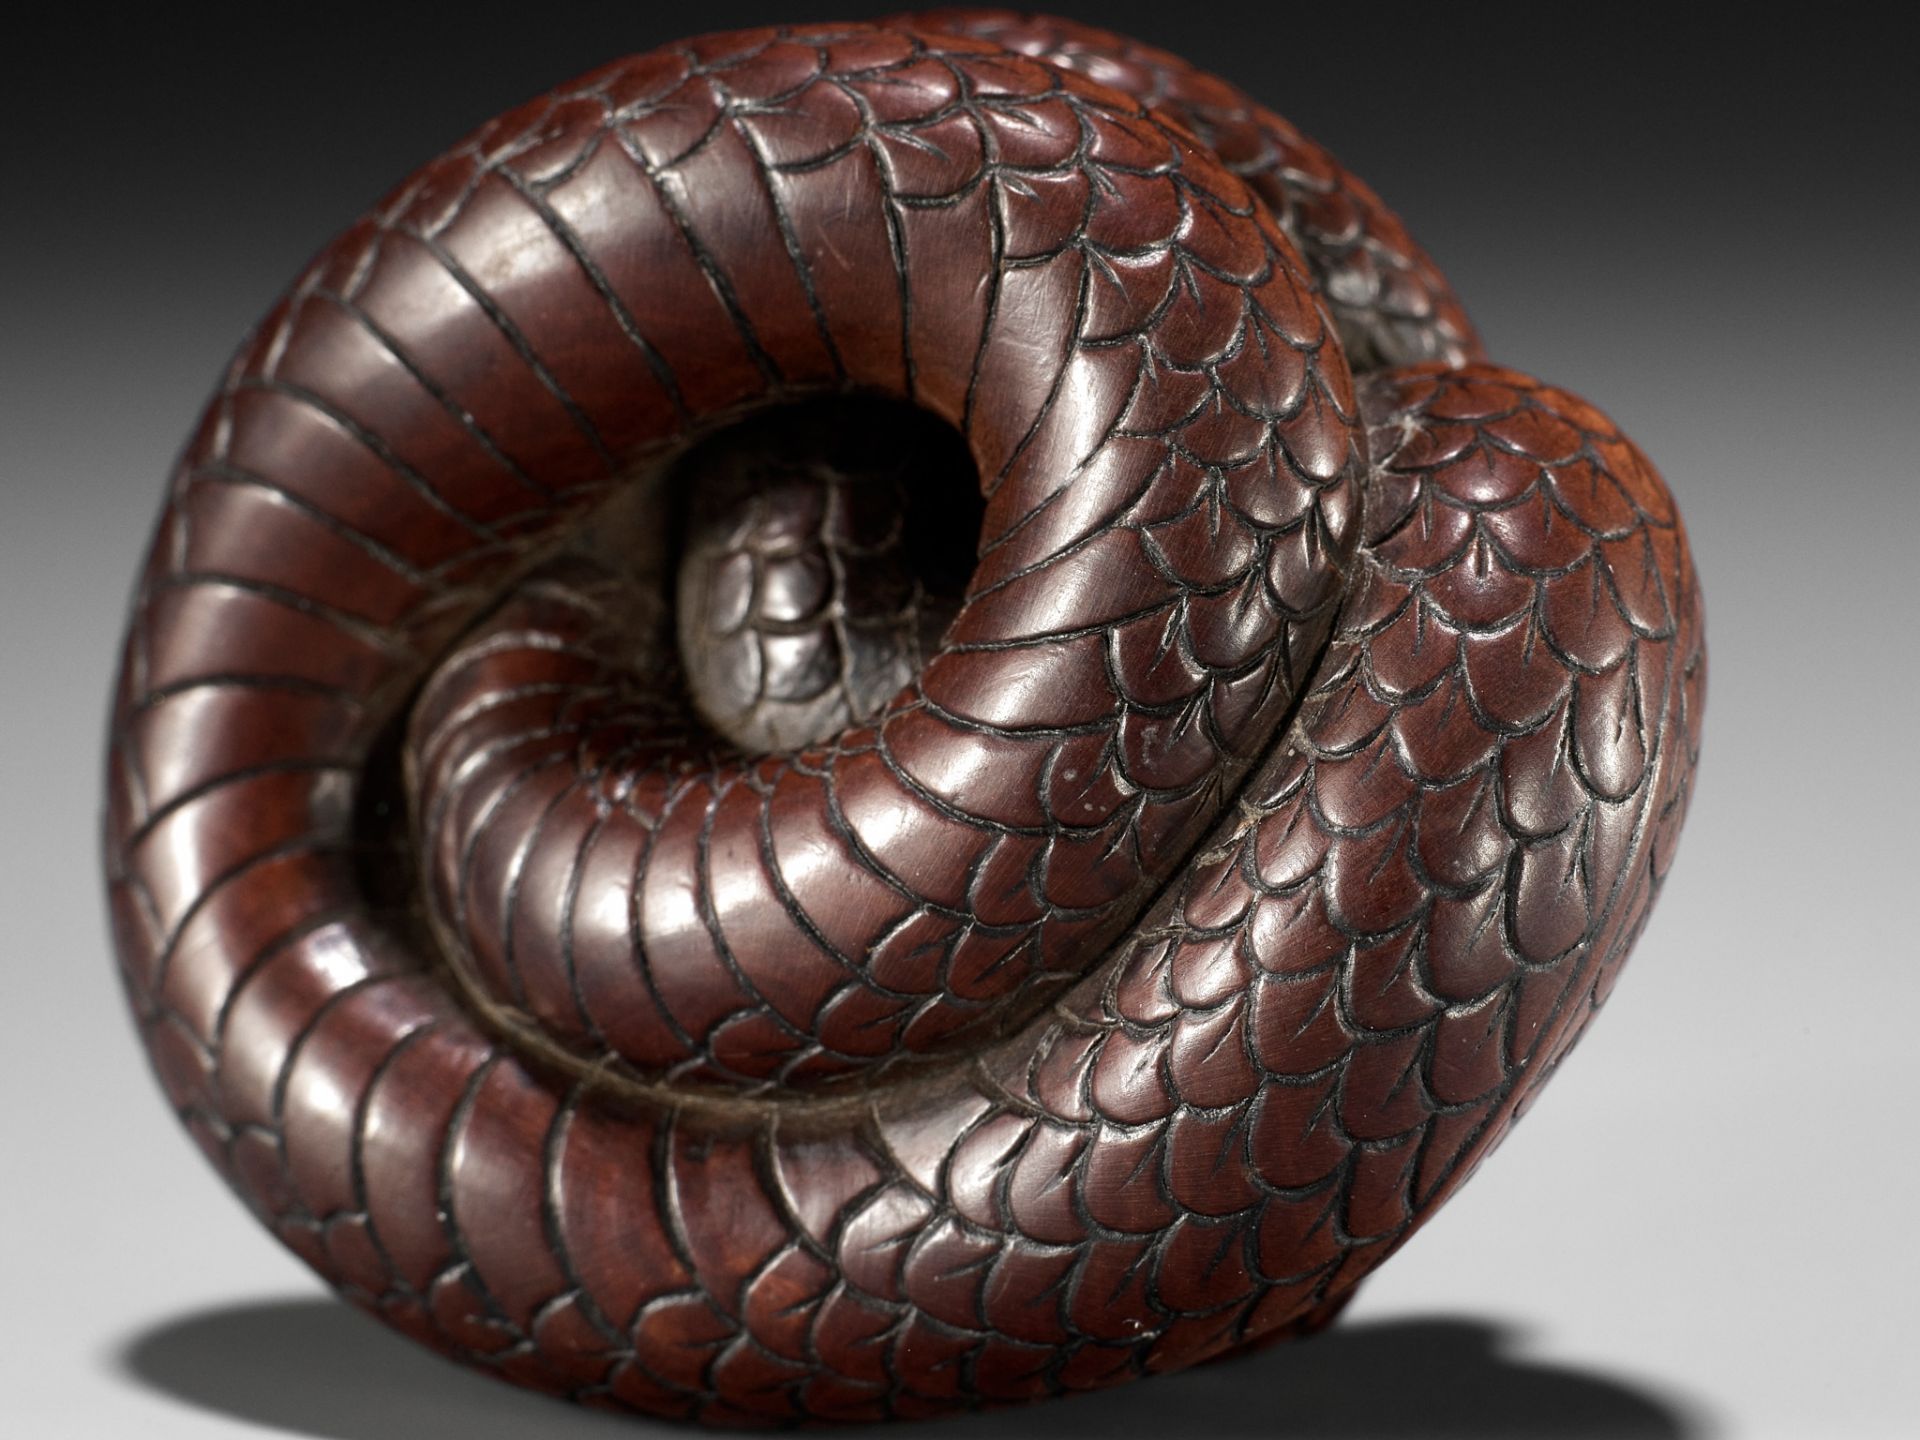 AN EXCEPTIONAL AND LARGE WOOD NETSUKE OF A SNAKE, ATTRIBUTED TO OKATOMO - Image 7 of 19